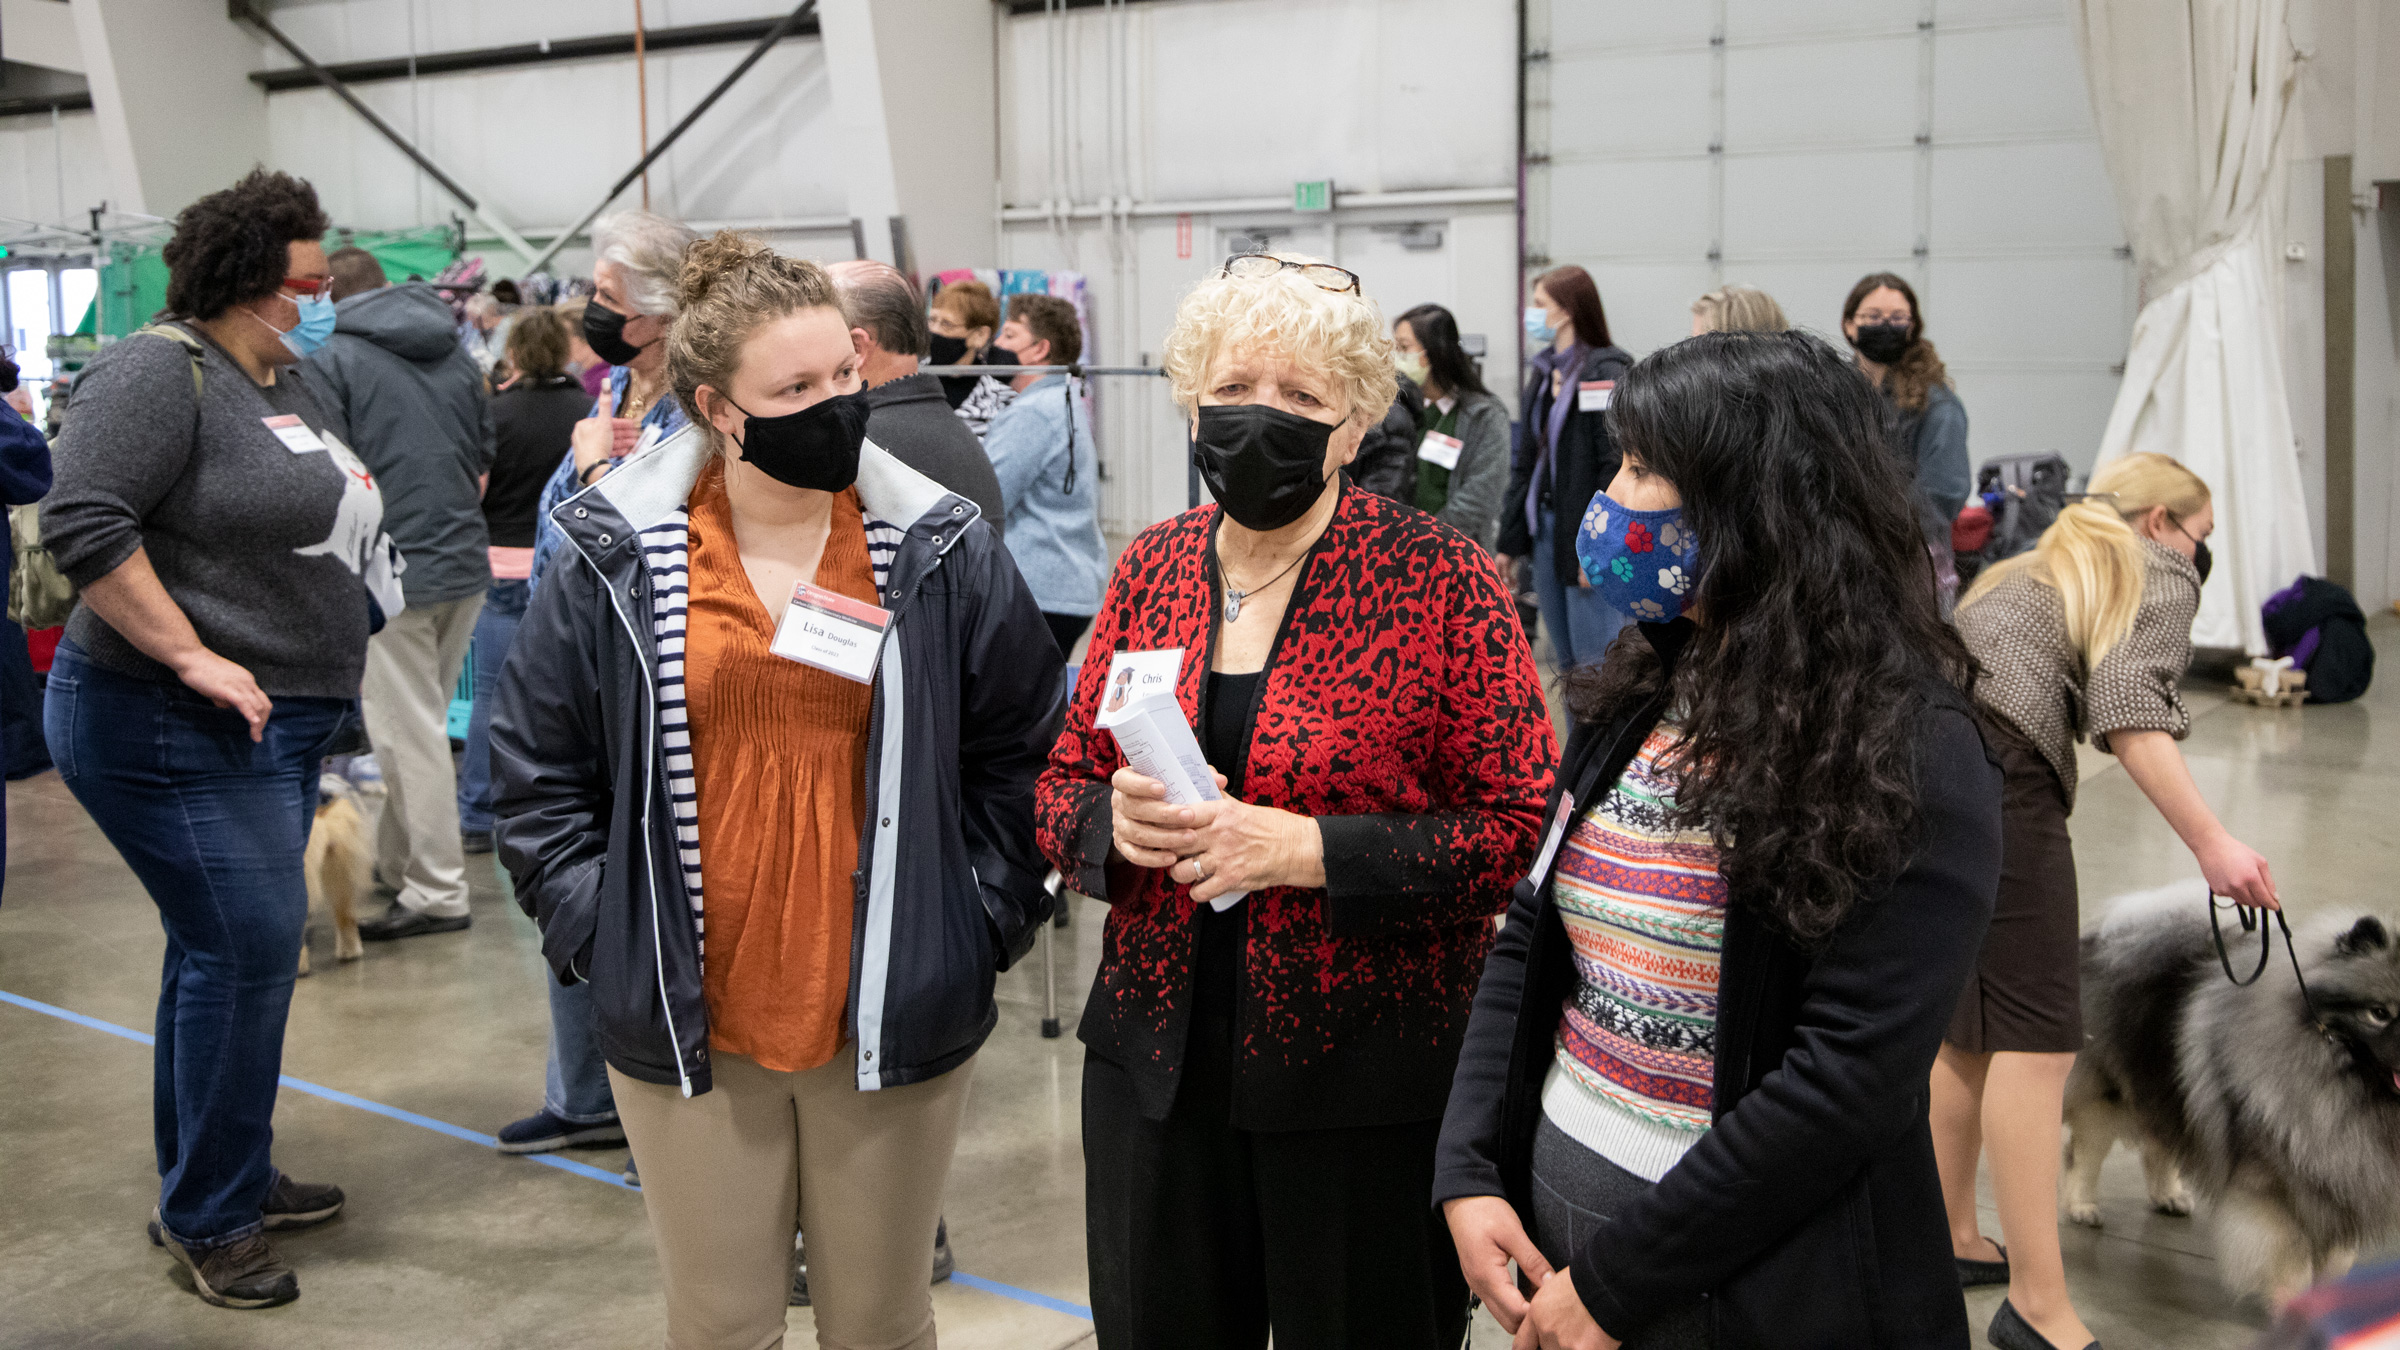 Chris Levy discusses AKC judging standards with veterinary students Lisa Douglas (left) and Dianne Quiroz (right). 